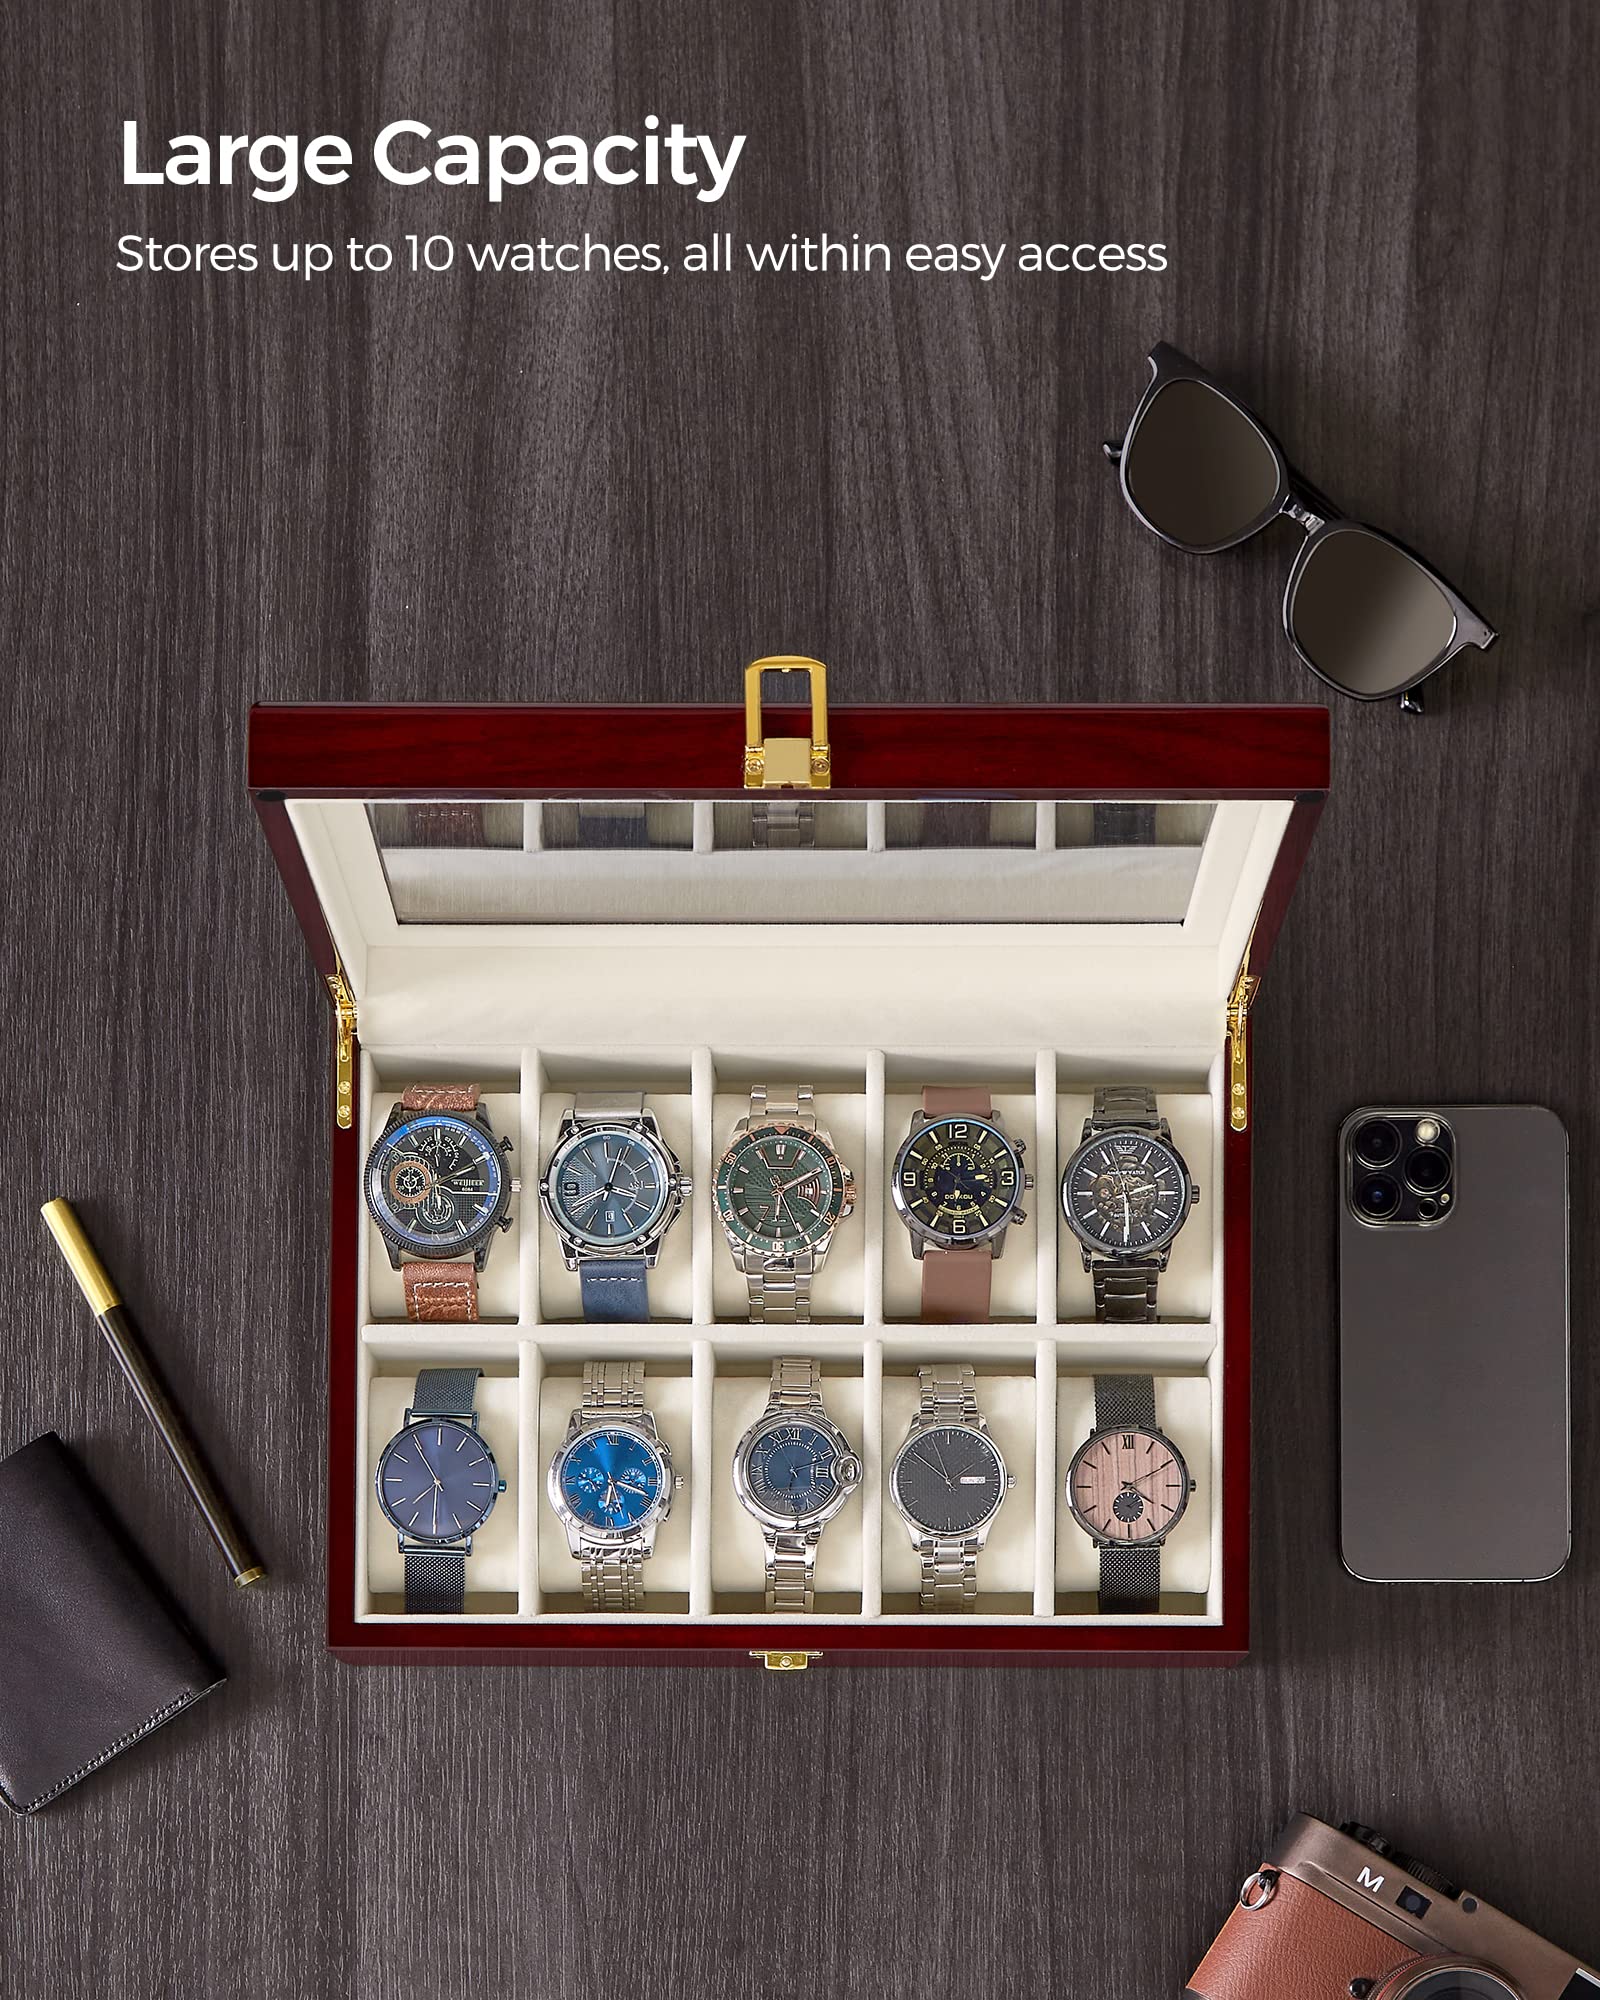 SONGMICS Watch Box, 10-Slot Watch Case with Large Glass Lid, Removable Watch Pillows, Velvet Lining, Watch Box Organizer, Gift for Loved Ones, Cherry Color UJOW10C